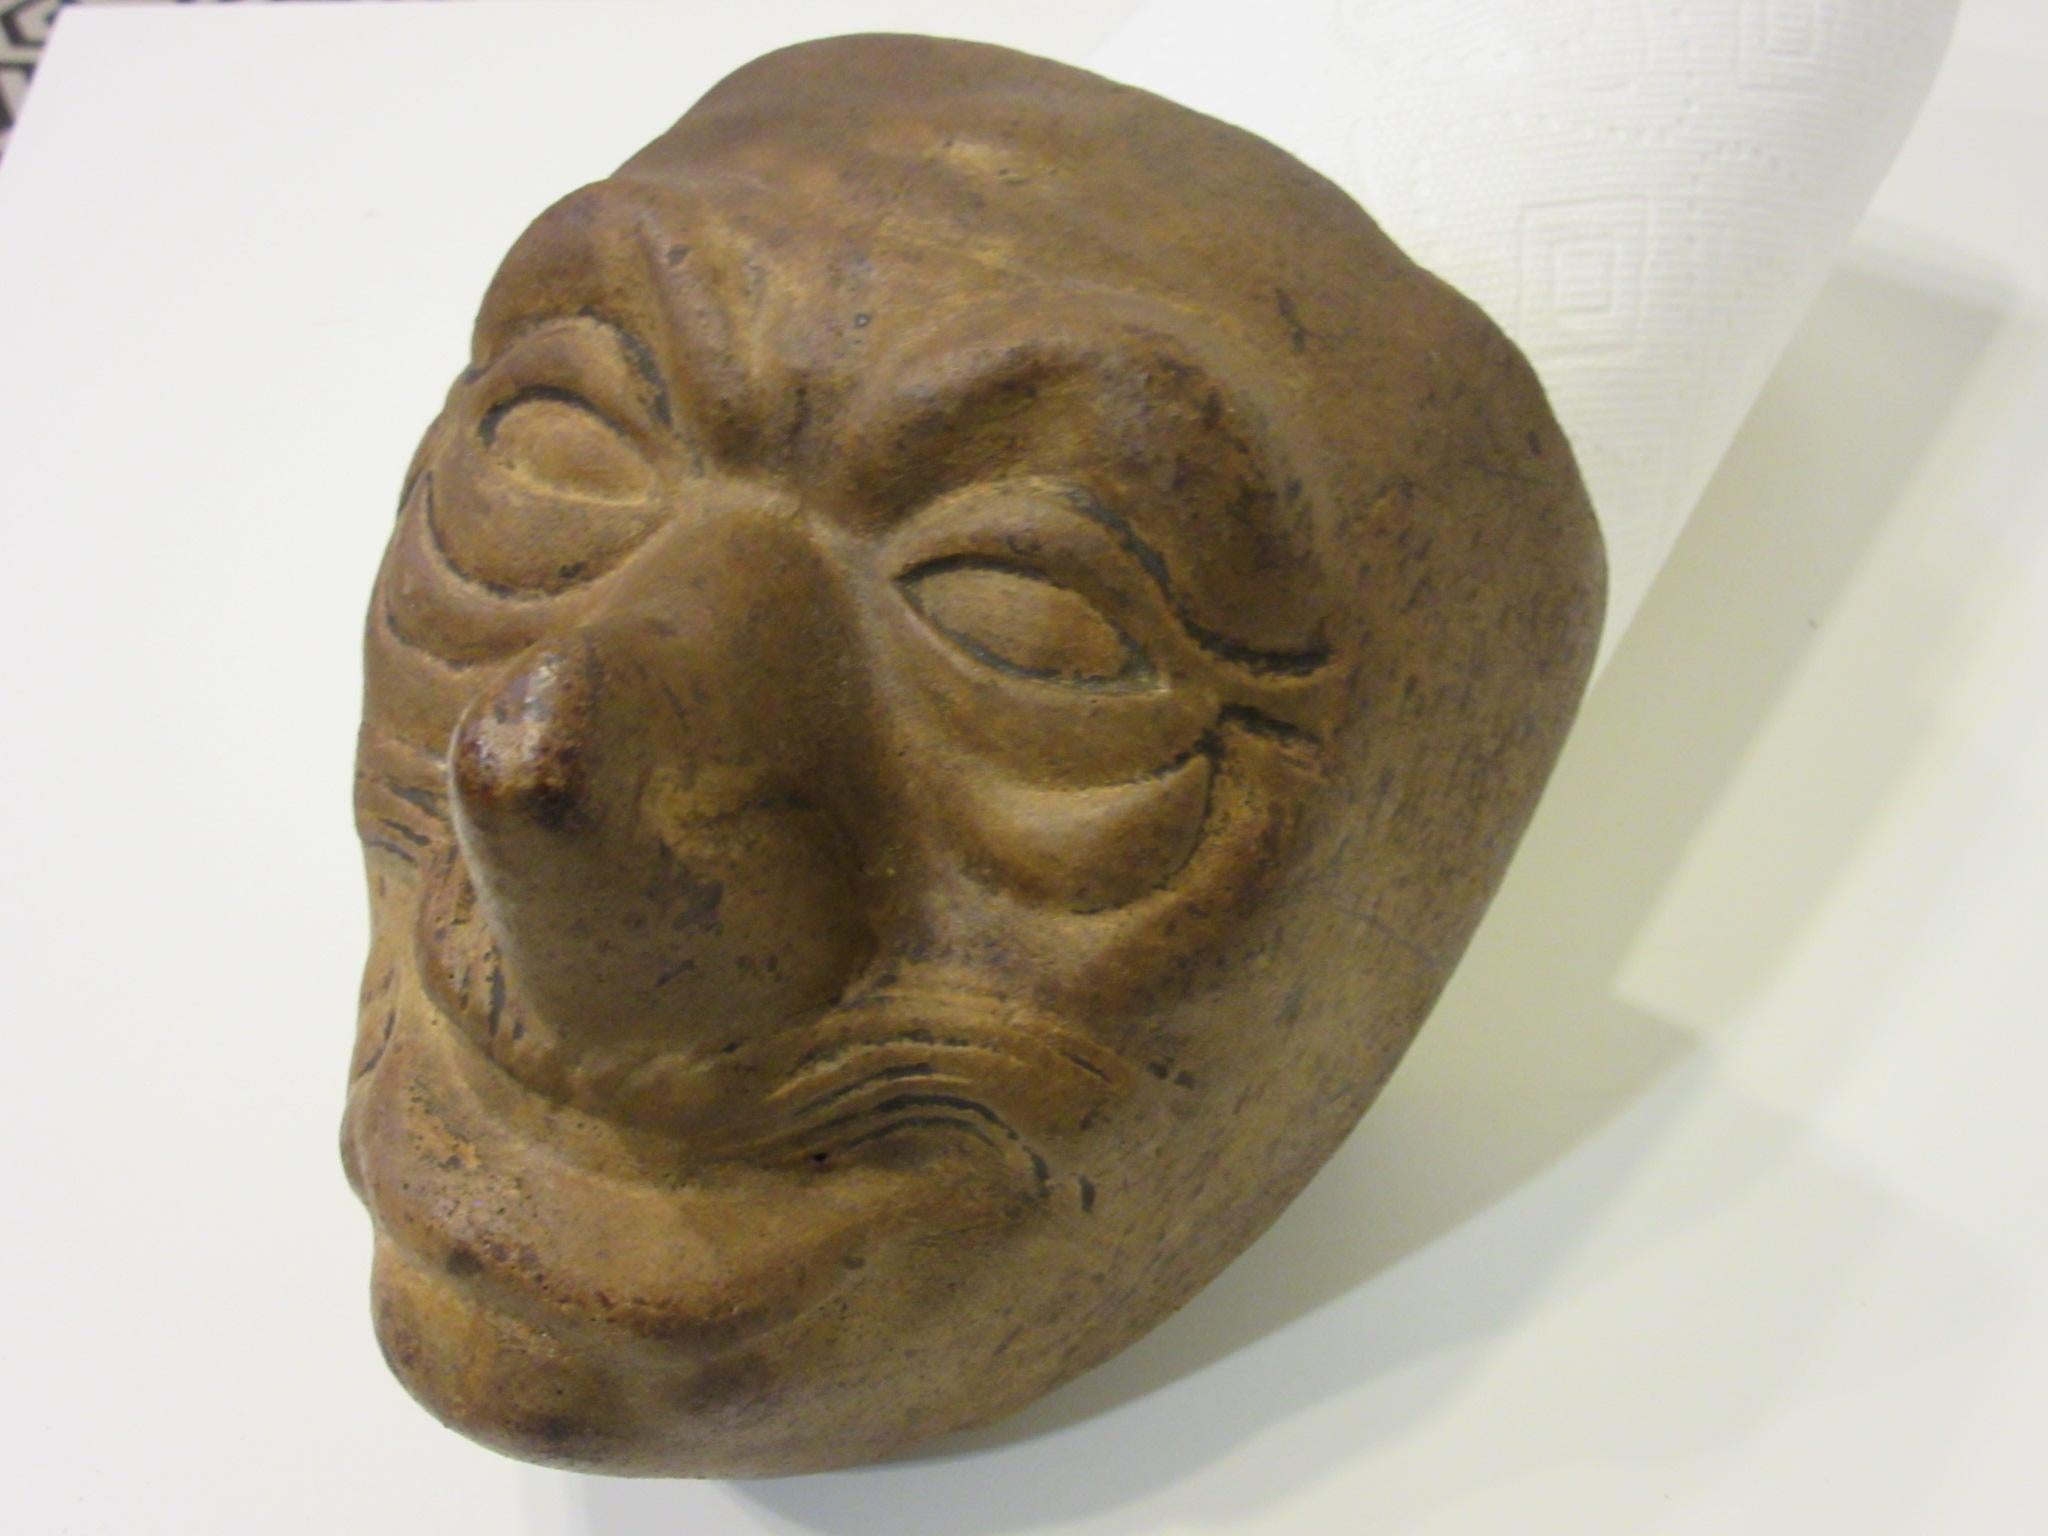 Folk Art Vintage Halloween Mask Mold by the American Mask Co.